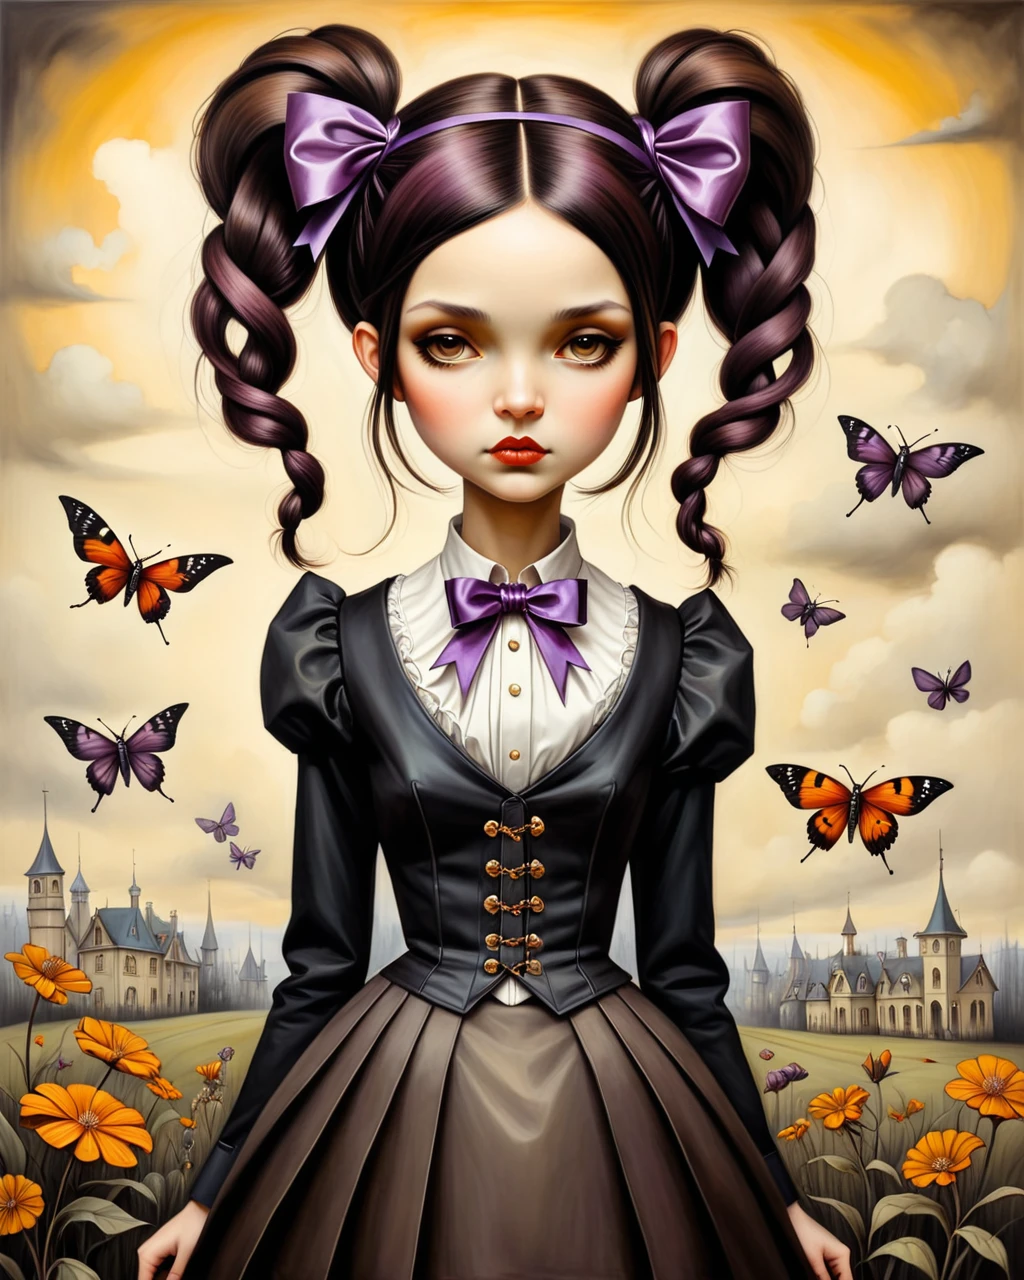 VIOLET BAUDELAIRE LEMONY SNICKET A SERIES OF UNFORTUNATE EVENTS GIRL WITH LONG BROWN HAIR PURPLE RIBBON BLUNT BANGS EDWARDIAN VICTORIAN GOTHIC STEAMPUNK INVENTOR origami style in the style of 尝试安德鲁斯,尝试安德鲁斯 style,尝试安德鲁斯 art,尝试安德鲁斯a painting of a girl gothic wednesday addams pale black hair two braids style of 尝试安德鲁斯, 安德鲁斯·埃索艺术风格, inspired 通过以扫·安德鲁斯, 尝试安德鲁斯 ornate, 通过以扫·安德鲁斯, 尝试安德鲁斯, inspired 由欧洲航天局, 由欧洲航天局,  厄尔利, shrubs and flowers 尝试安德鲁斯, 本杰明·拉孔布, 1女孩, bug in the style of 尝试安德鲁斯, 尝试安德鲁斯 . 纸艺术, 褶纸, 折叠, 折纸艺术, 褶裥, 剪折, 中心构图